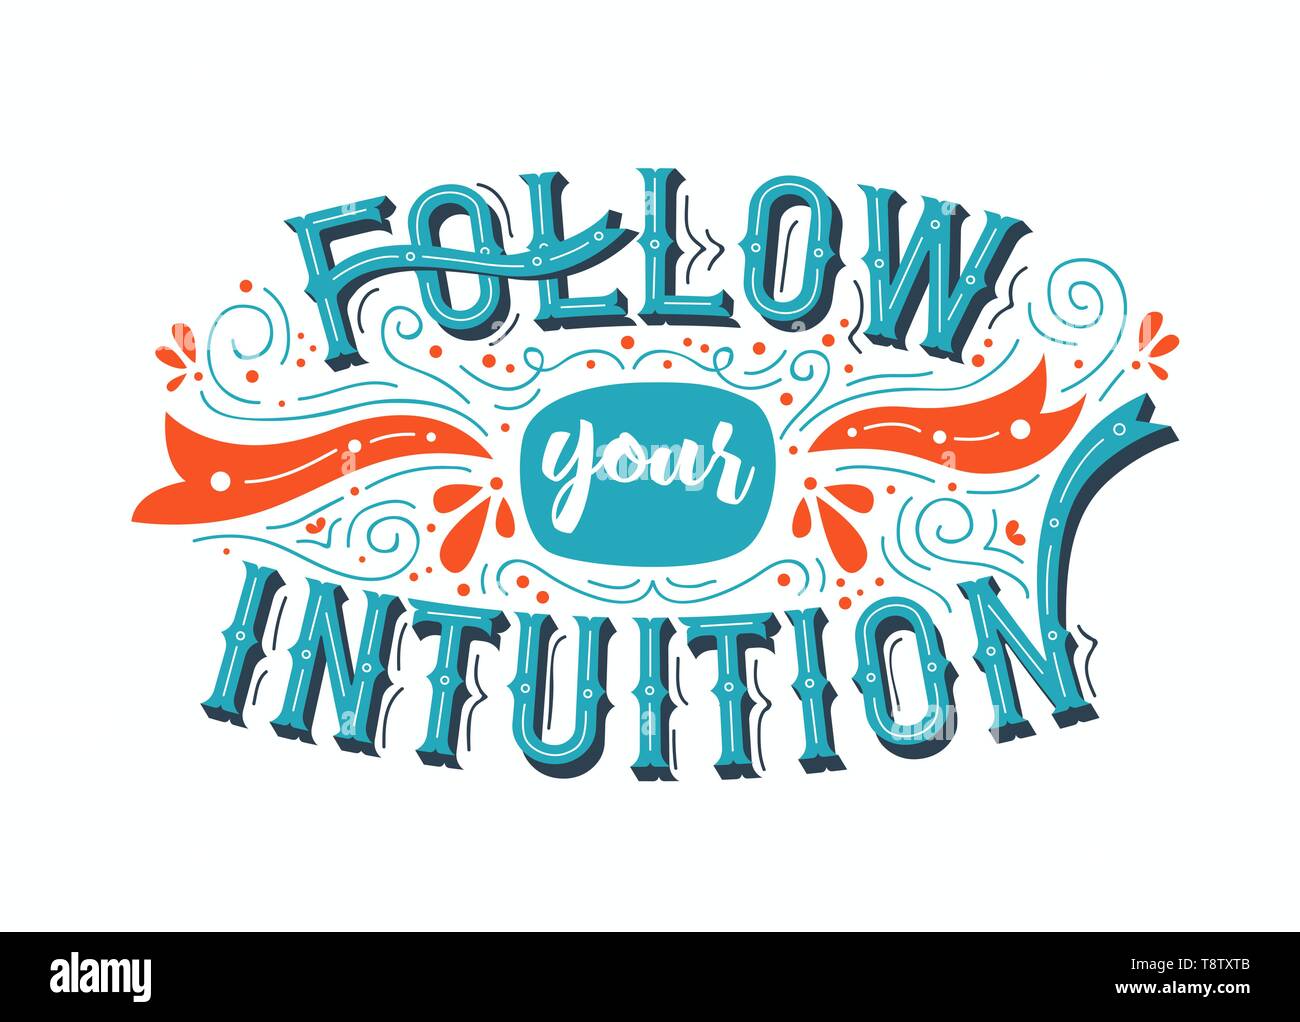 Follow Your Intuition typography quote poster for positive life motivation, confidence and leadership. Colorful inspiration lettering design concept. Stock Vector